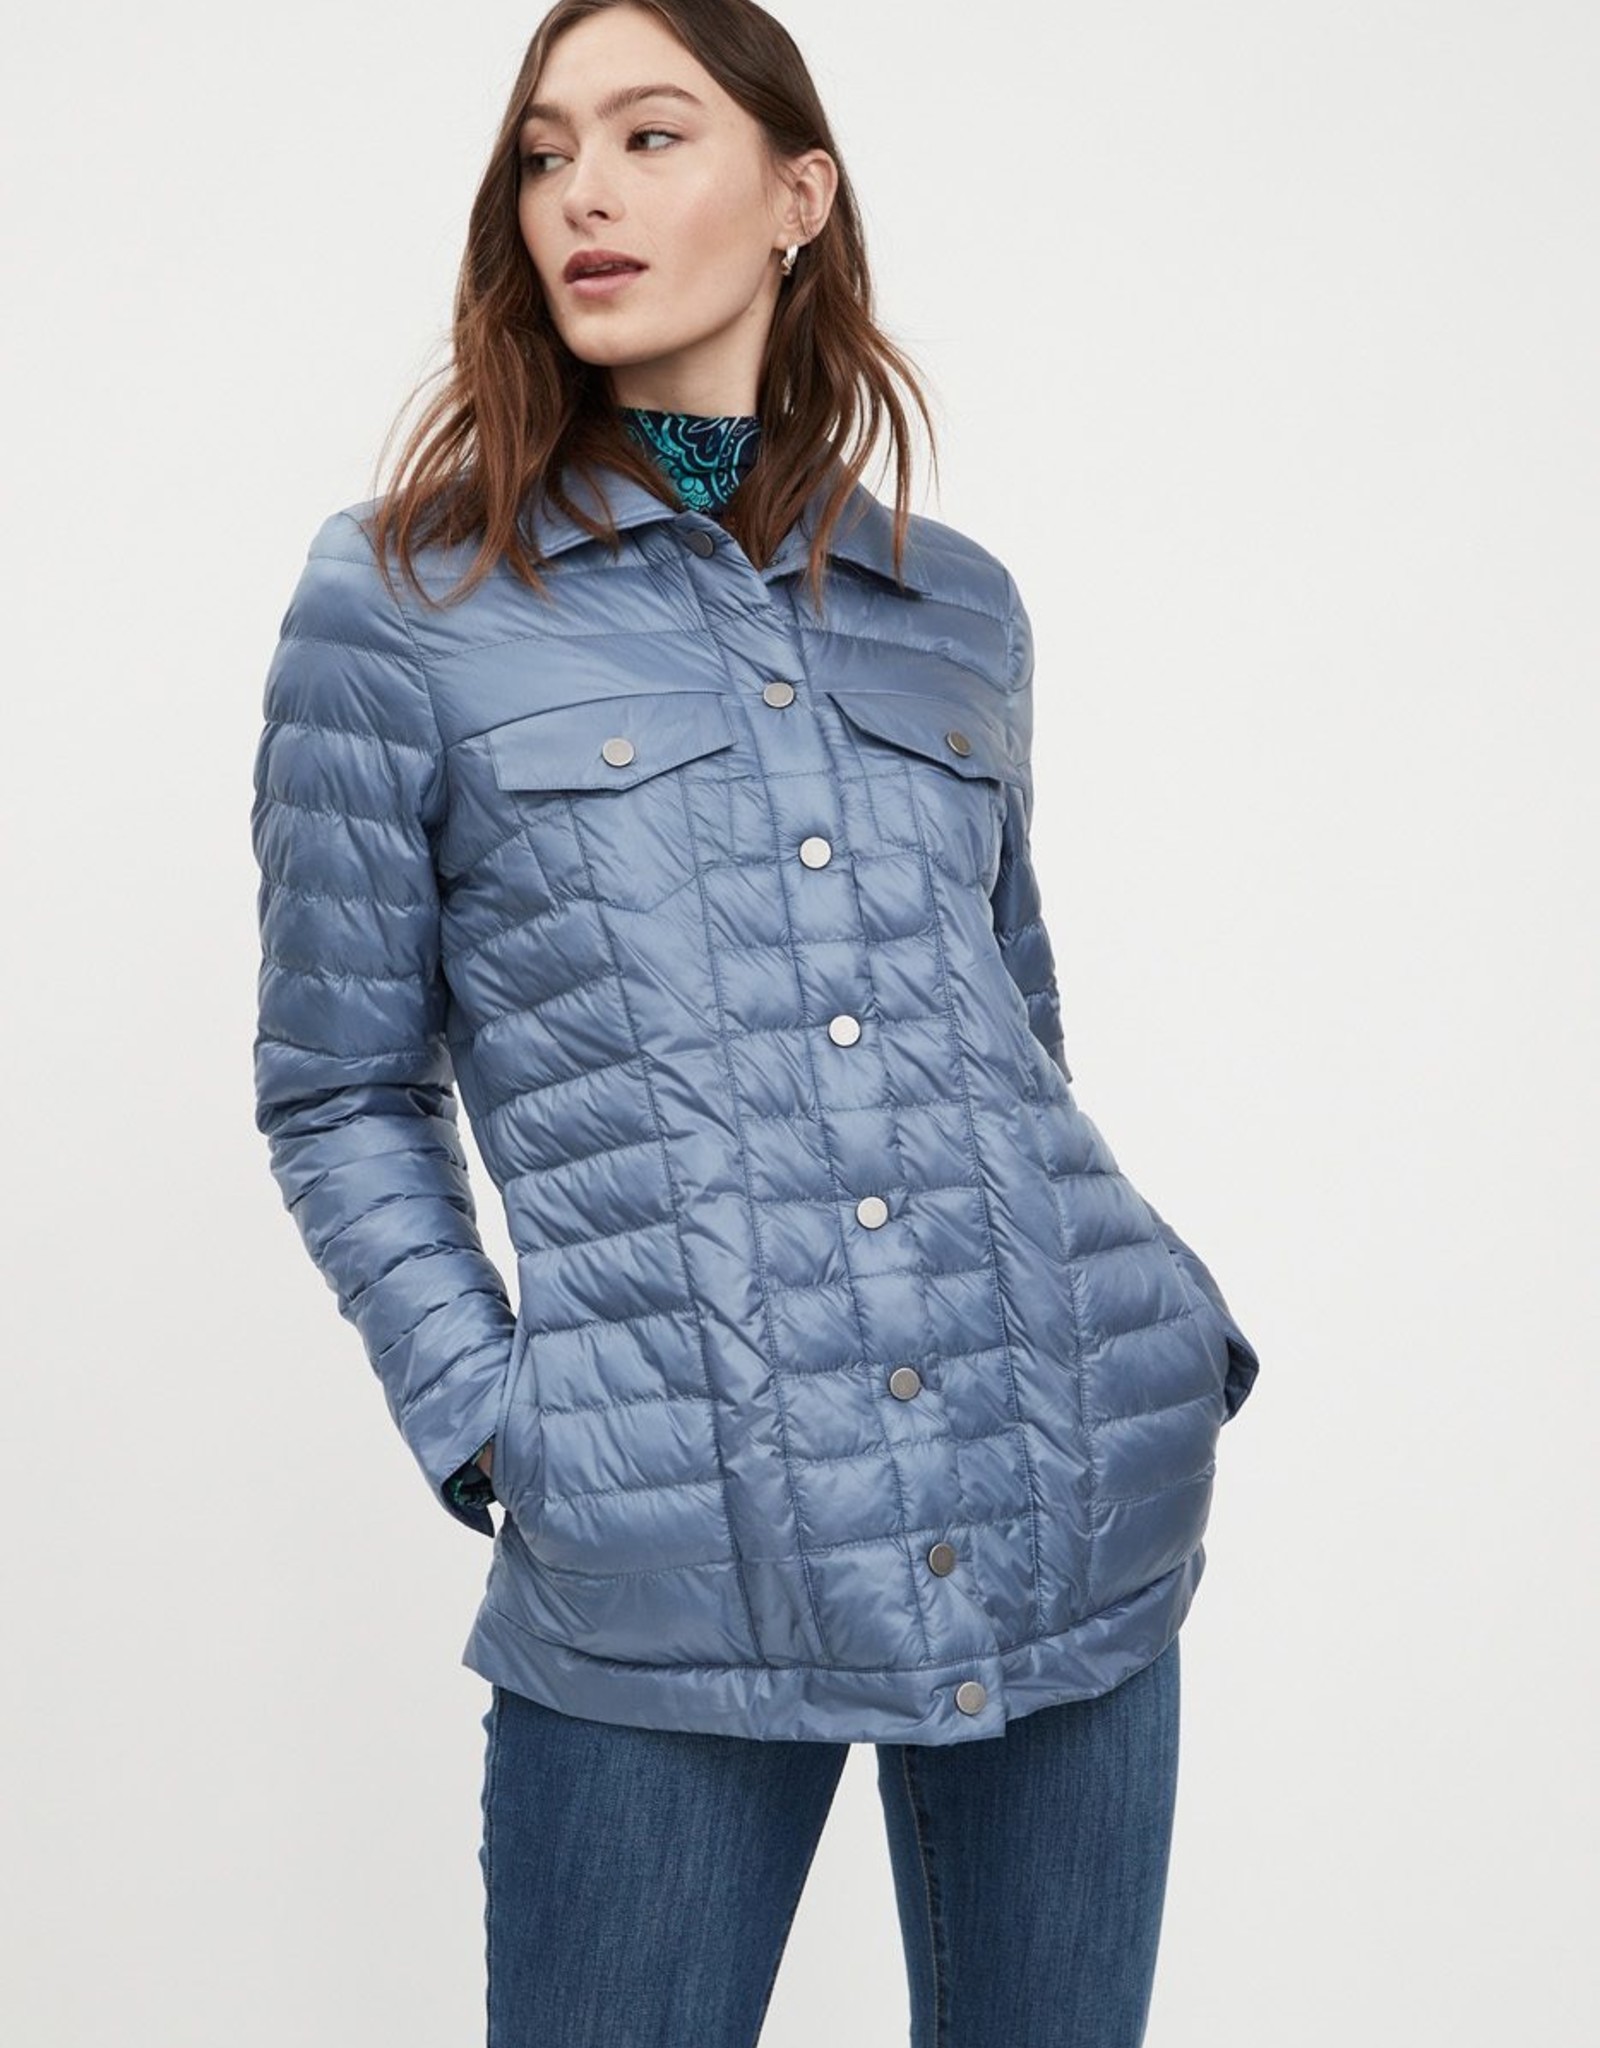 French Dressing Jeans FDJ Quilted Puffer Jacket 1730916